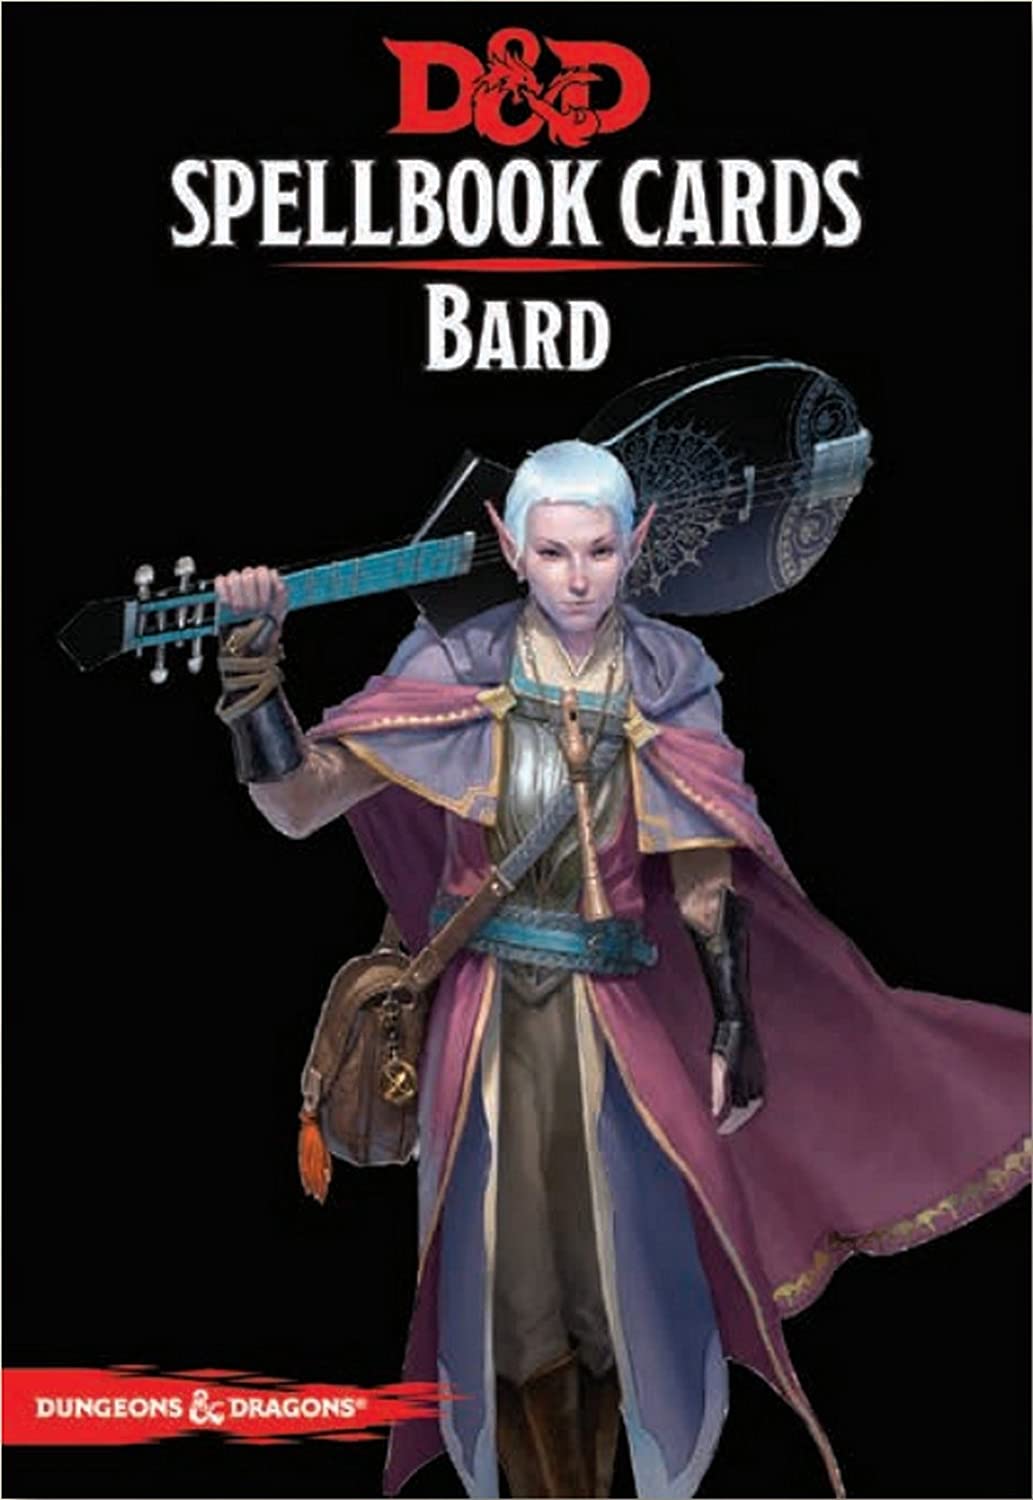 Dungeons & Dragons Spellbook Cards Bard